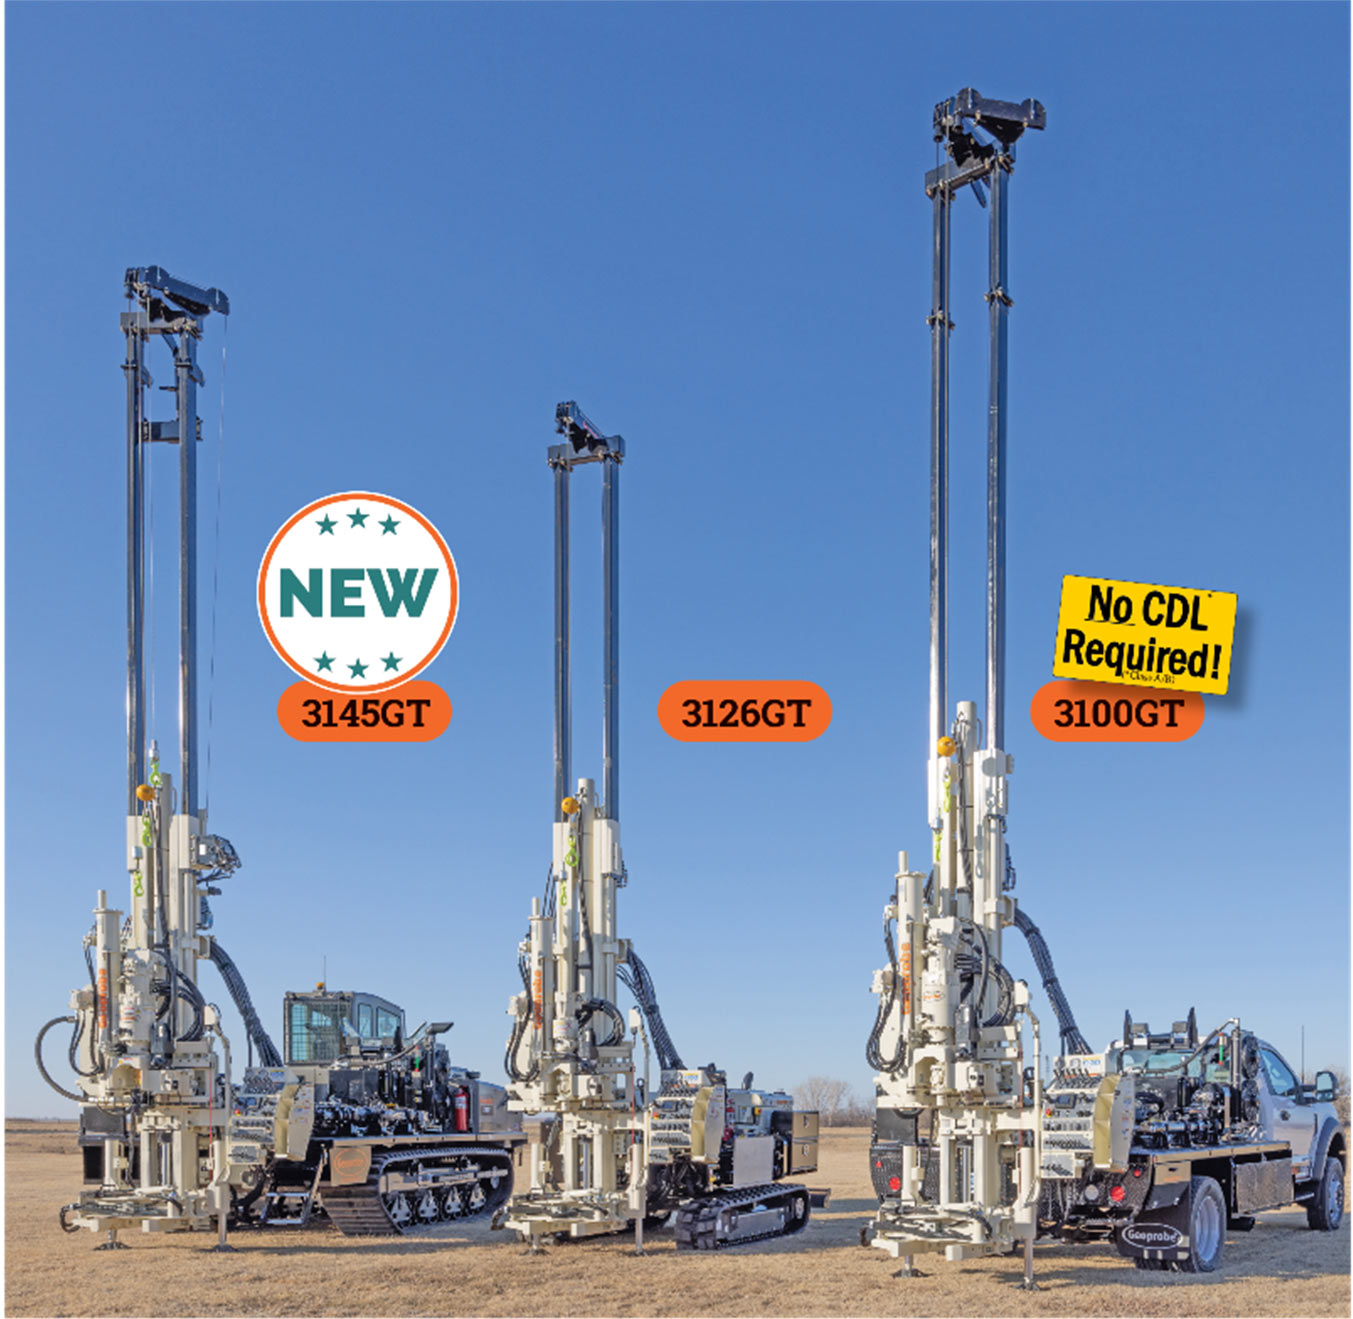 31 Series Rig Lineup - 3145GT, 3126GT, 3100GT - move drillers assistant up the learning curve quickly.